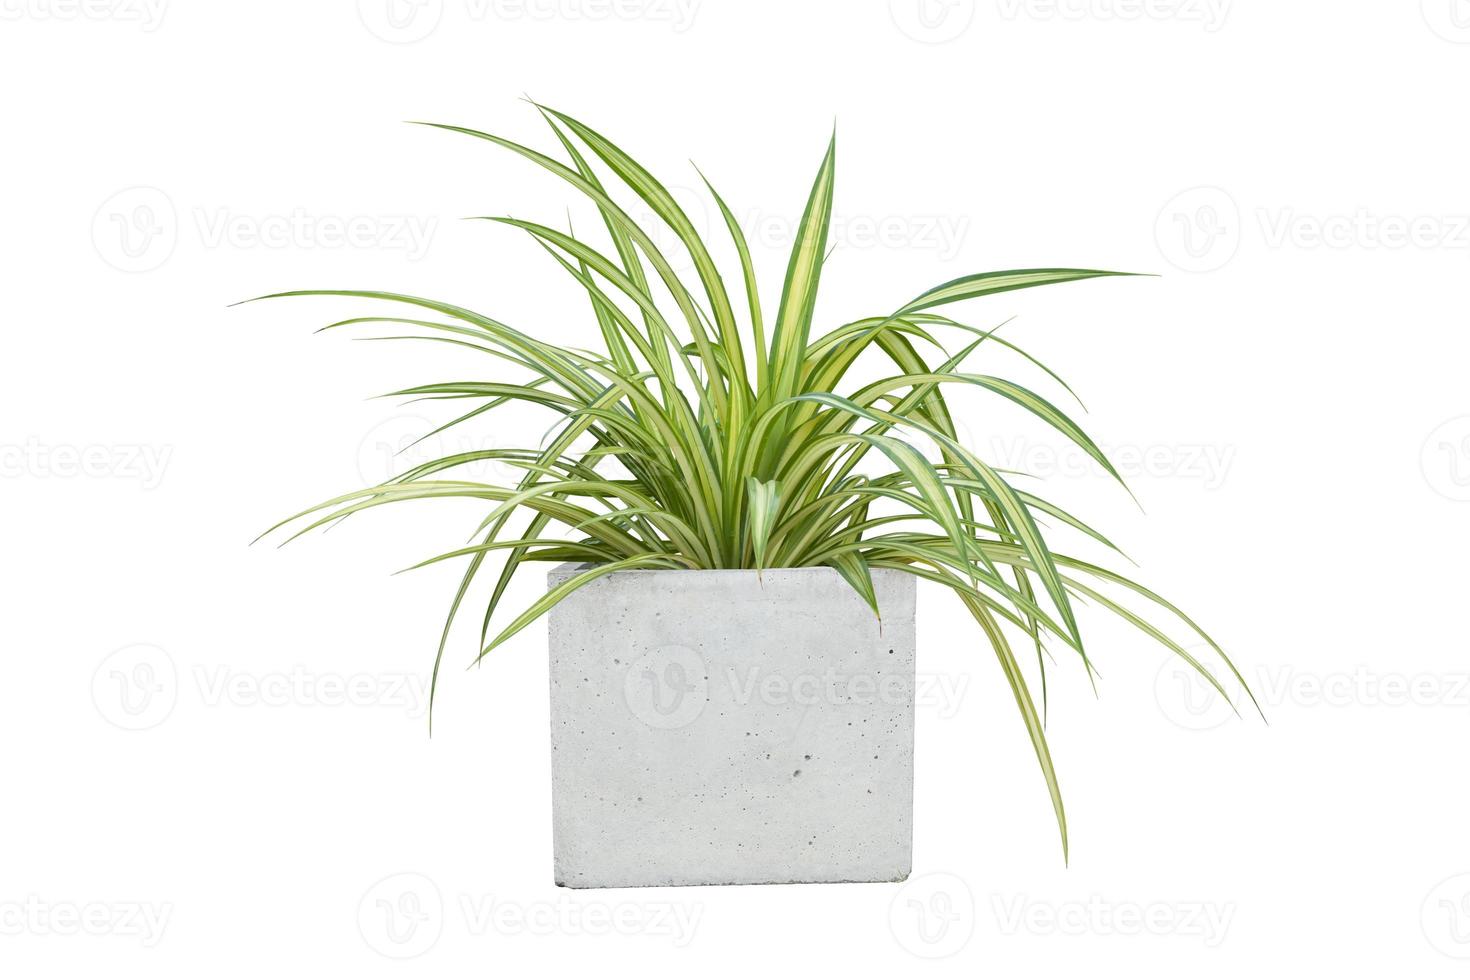 Fresh Spider Plant or Chlorophytum bichetii Karrer Backer with drops in cement pot isolated on white background included clipping path. photo